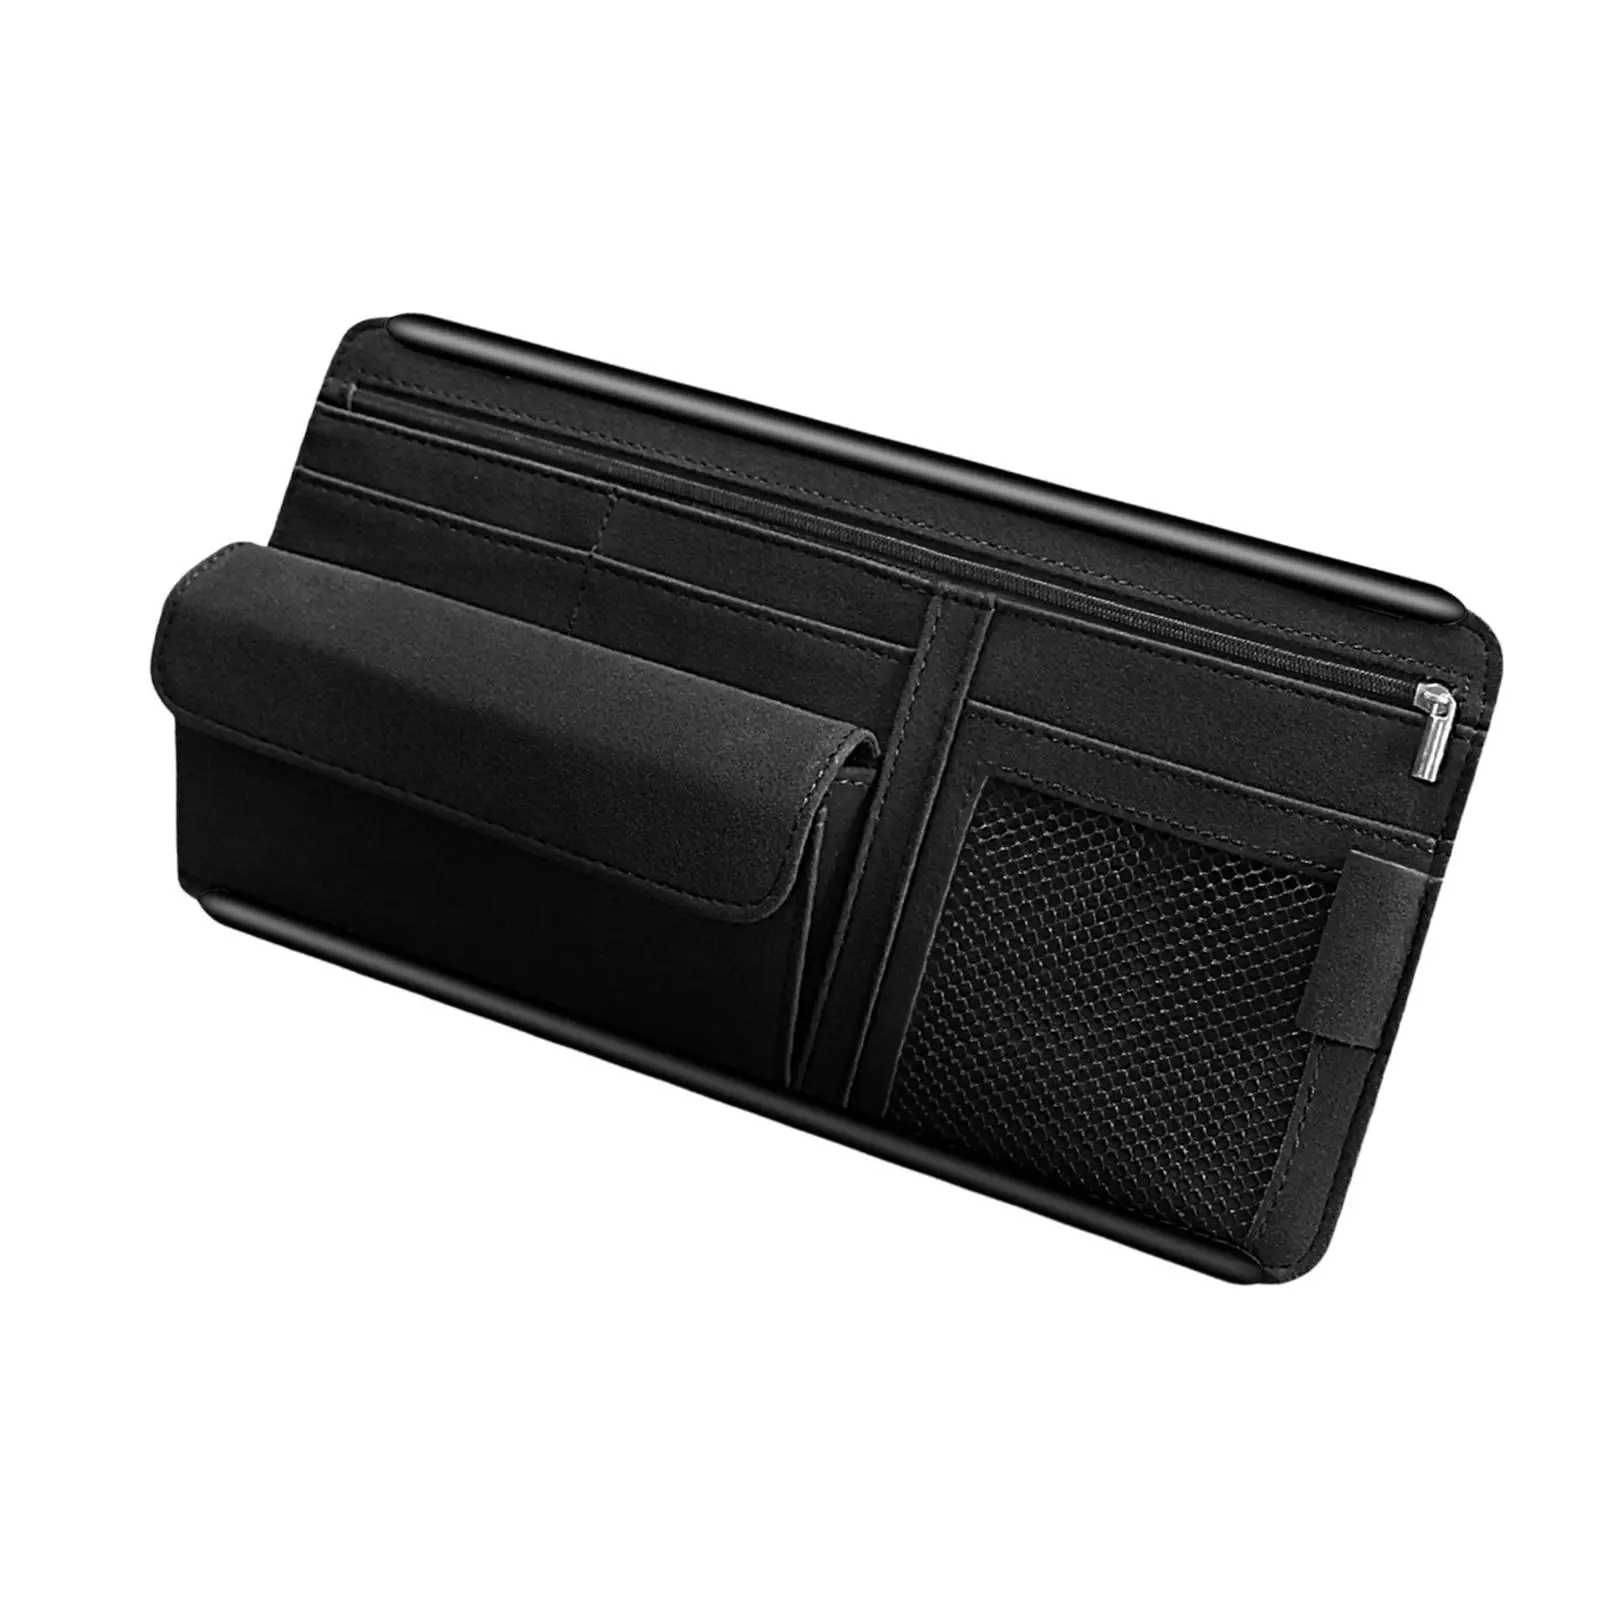 Universal Car Sun Visor Organizer Interior Accessories with Multi Pocket Zippers Storage Pouch for Cards Pens SUV Truck